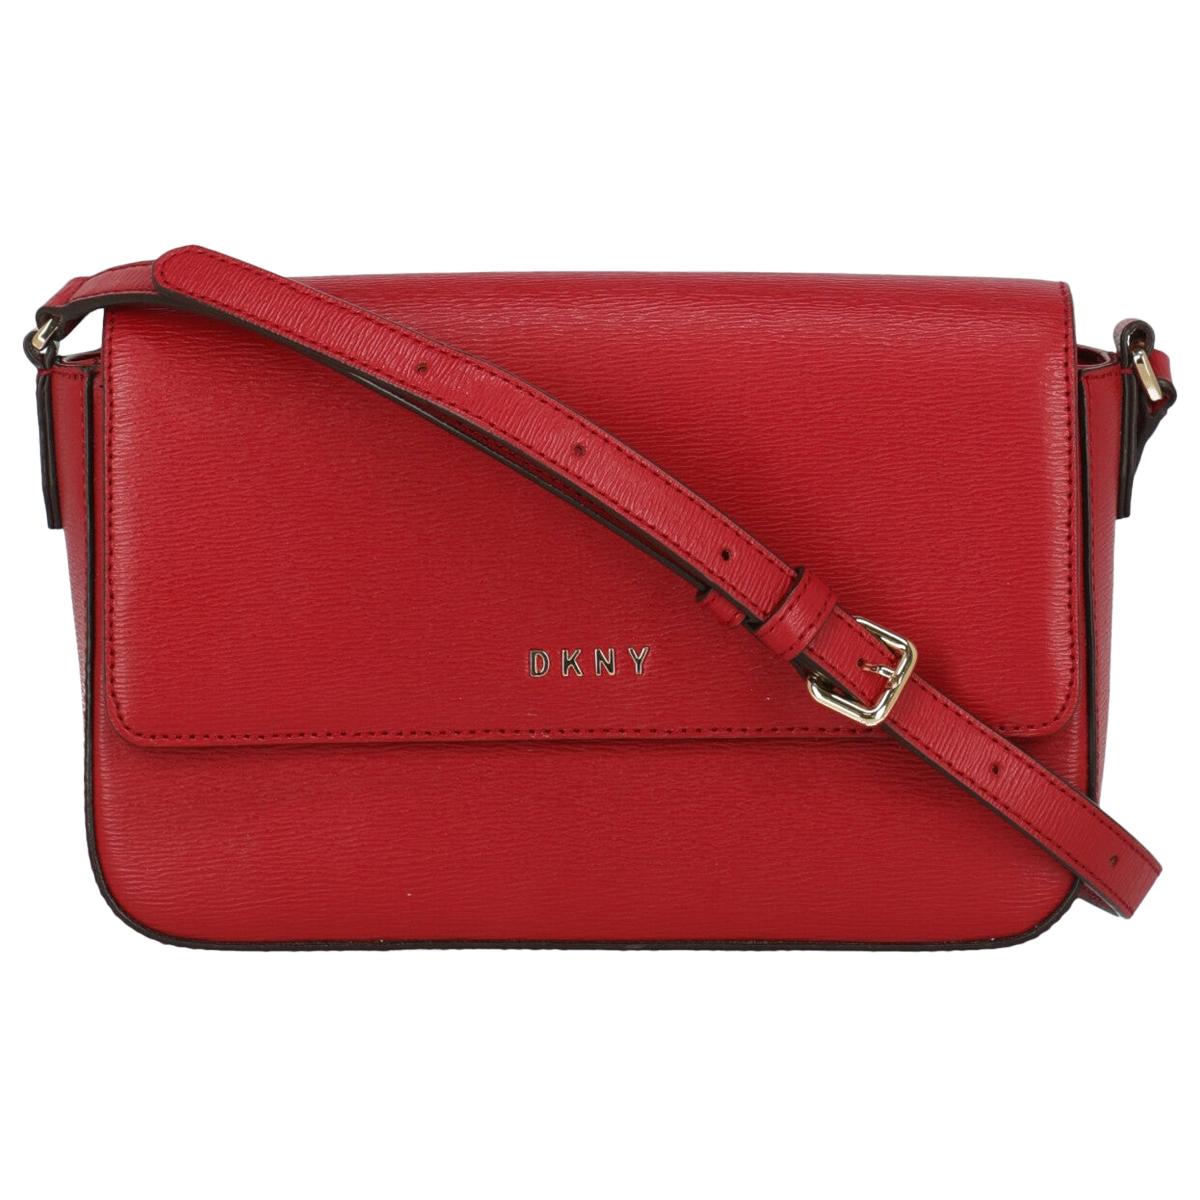 Dkny Woman Shoulder bag  Red Leather For Sale